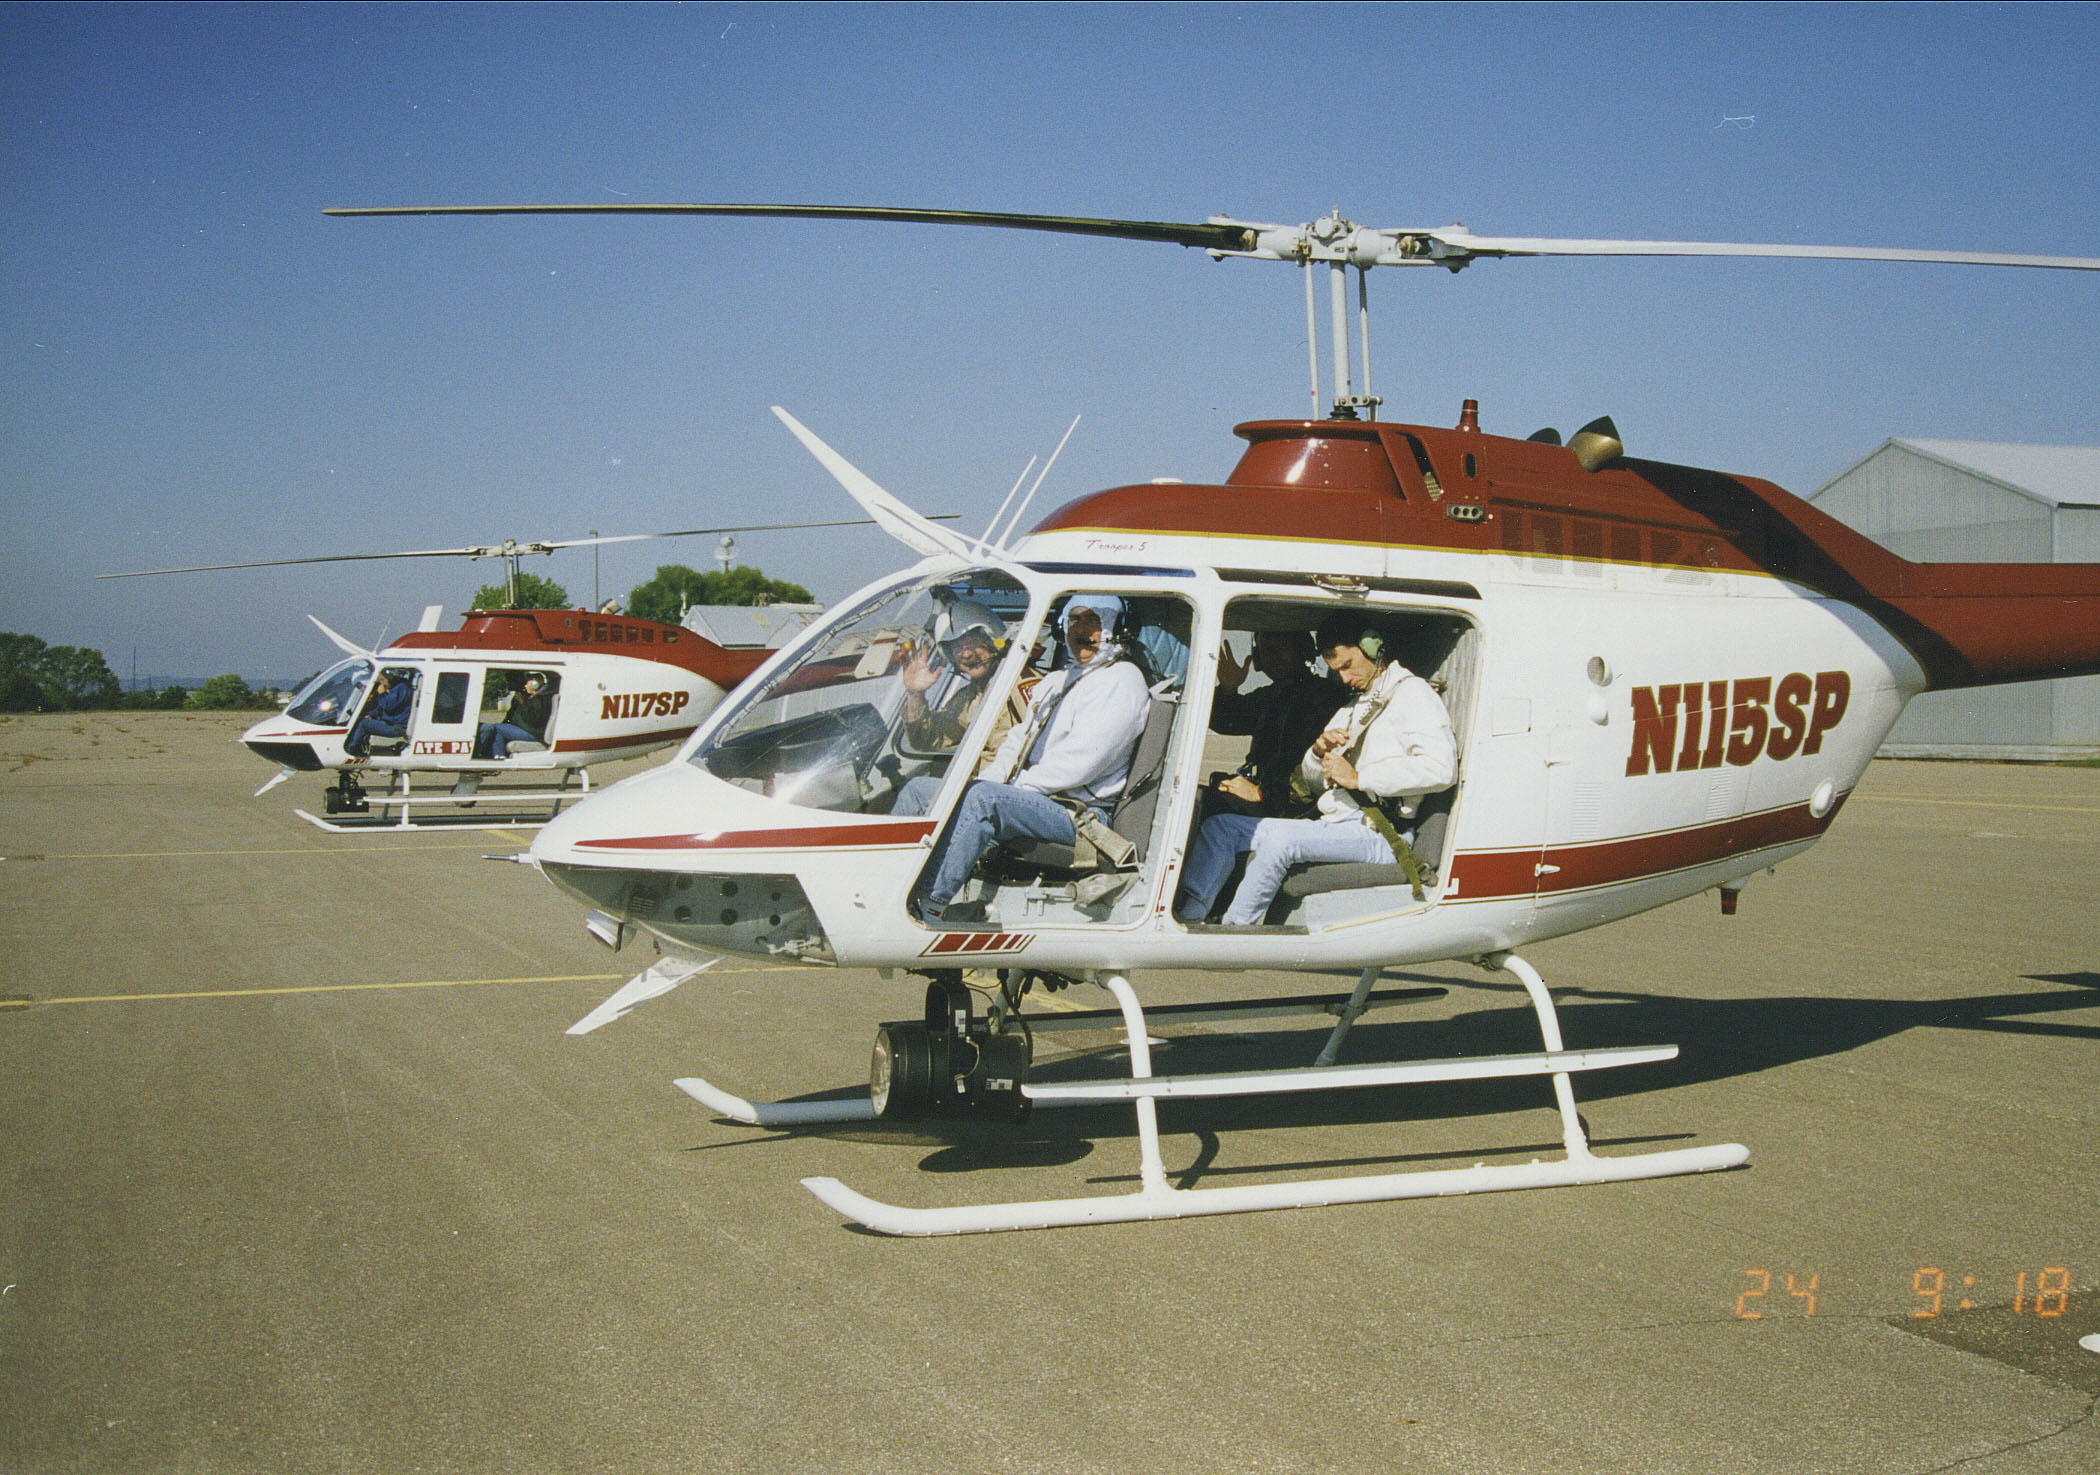 An early state patrol helicopter on the ground at an airport with four people inside